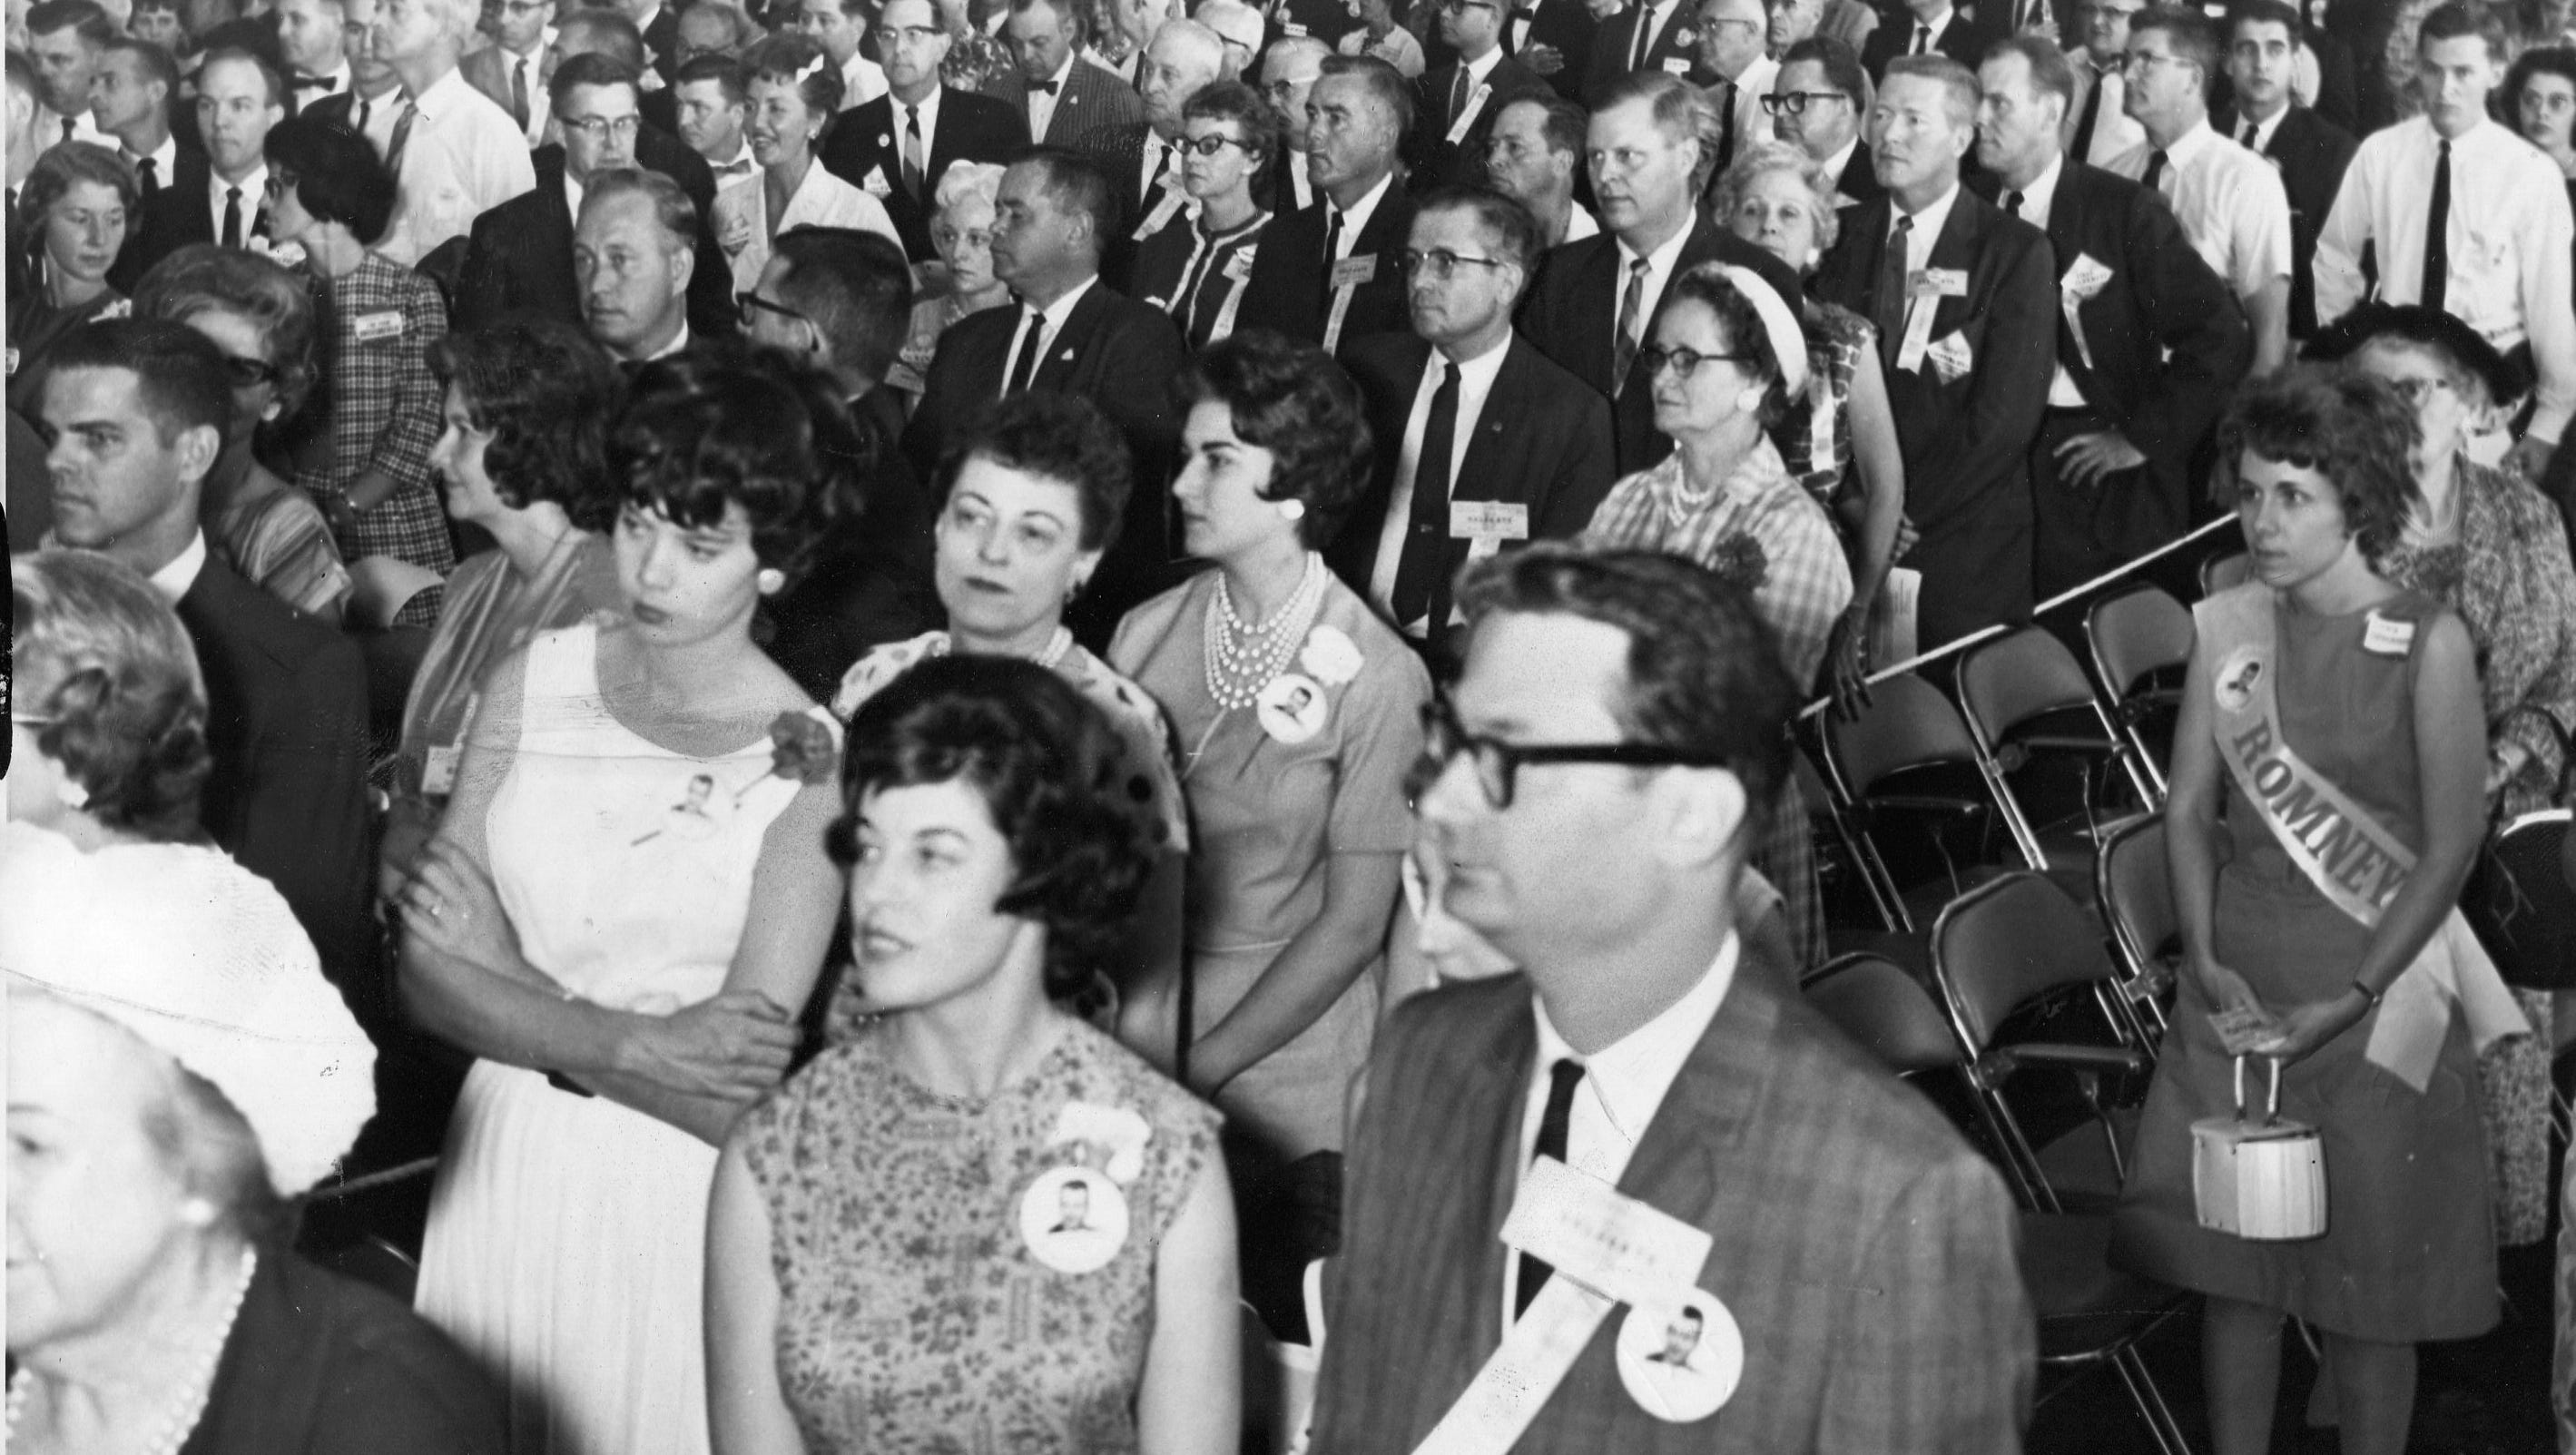 Michigan Republicans gather at Cobo in 1962, the year George Romney was elected governor of the state.